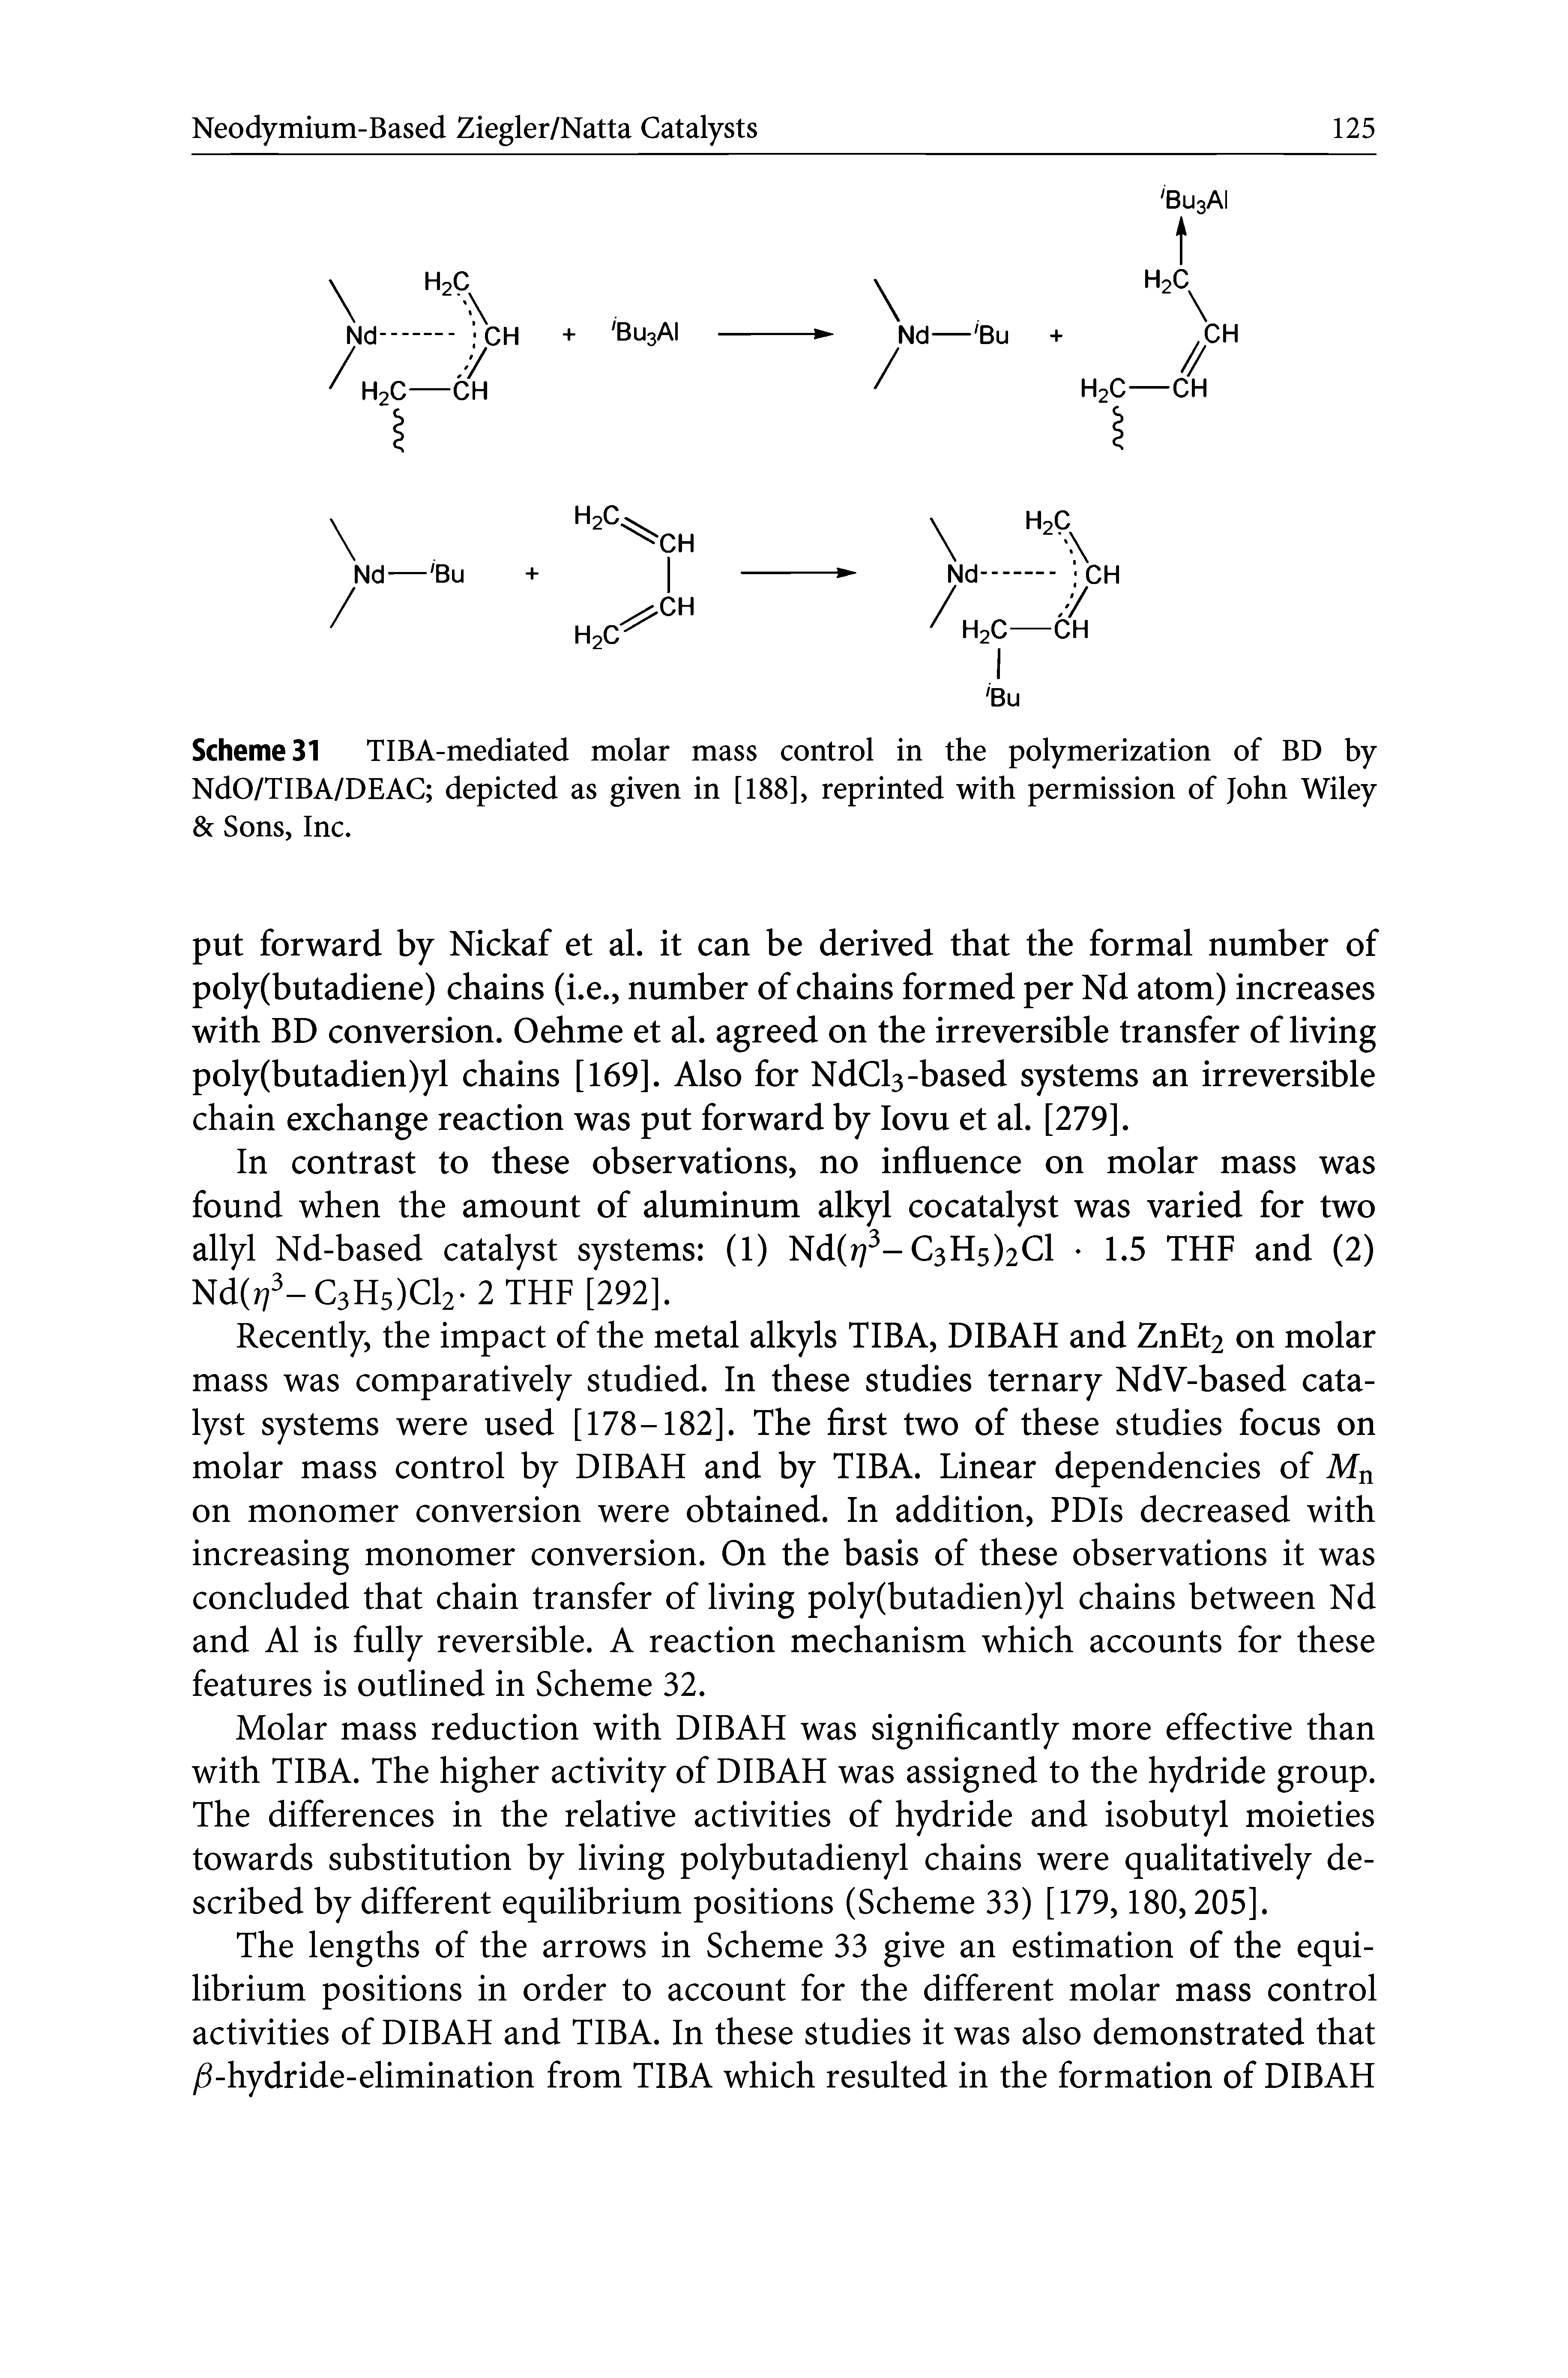 Scheme 31 TIBA-mediated molar mass control in the polymerization of BD by NdO/TIBA/DEAC depicted as given in [188], reprinted with permission of John Wiley Sons, Inc.